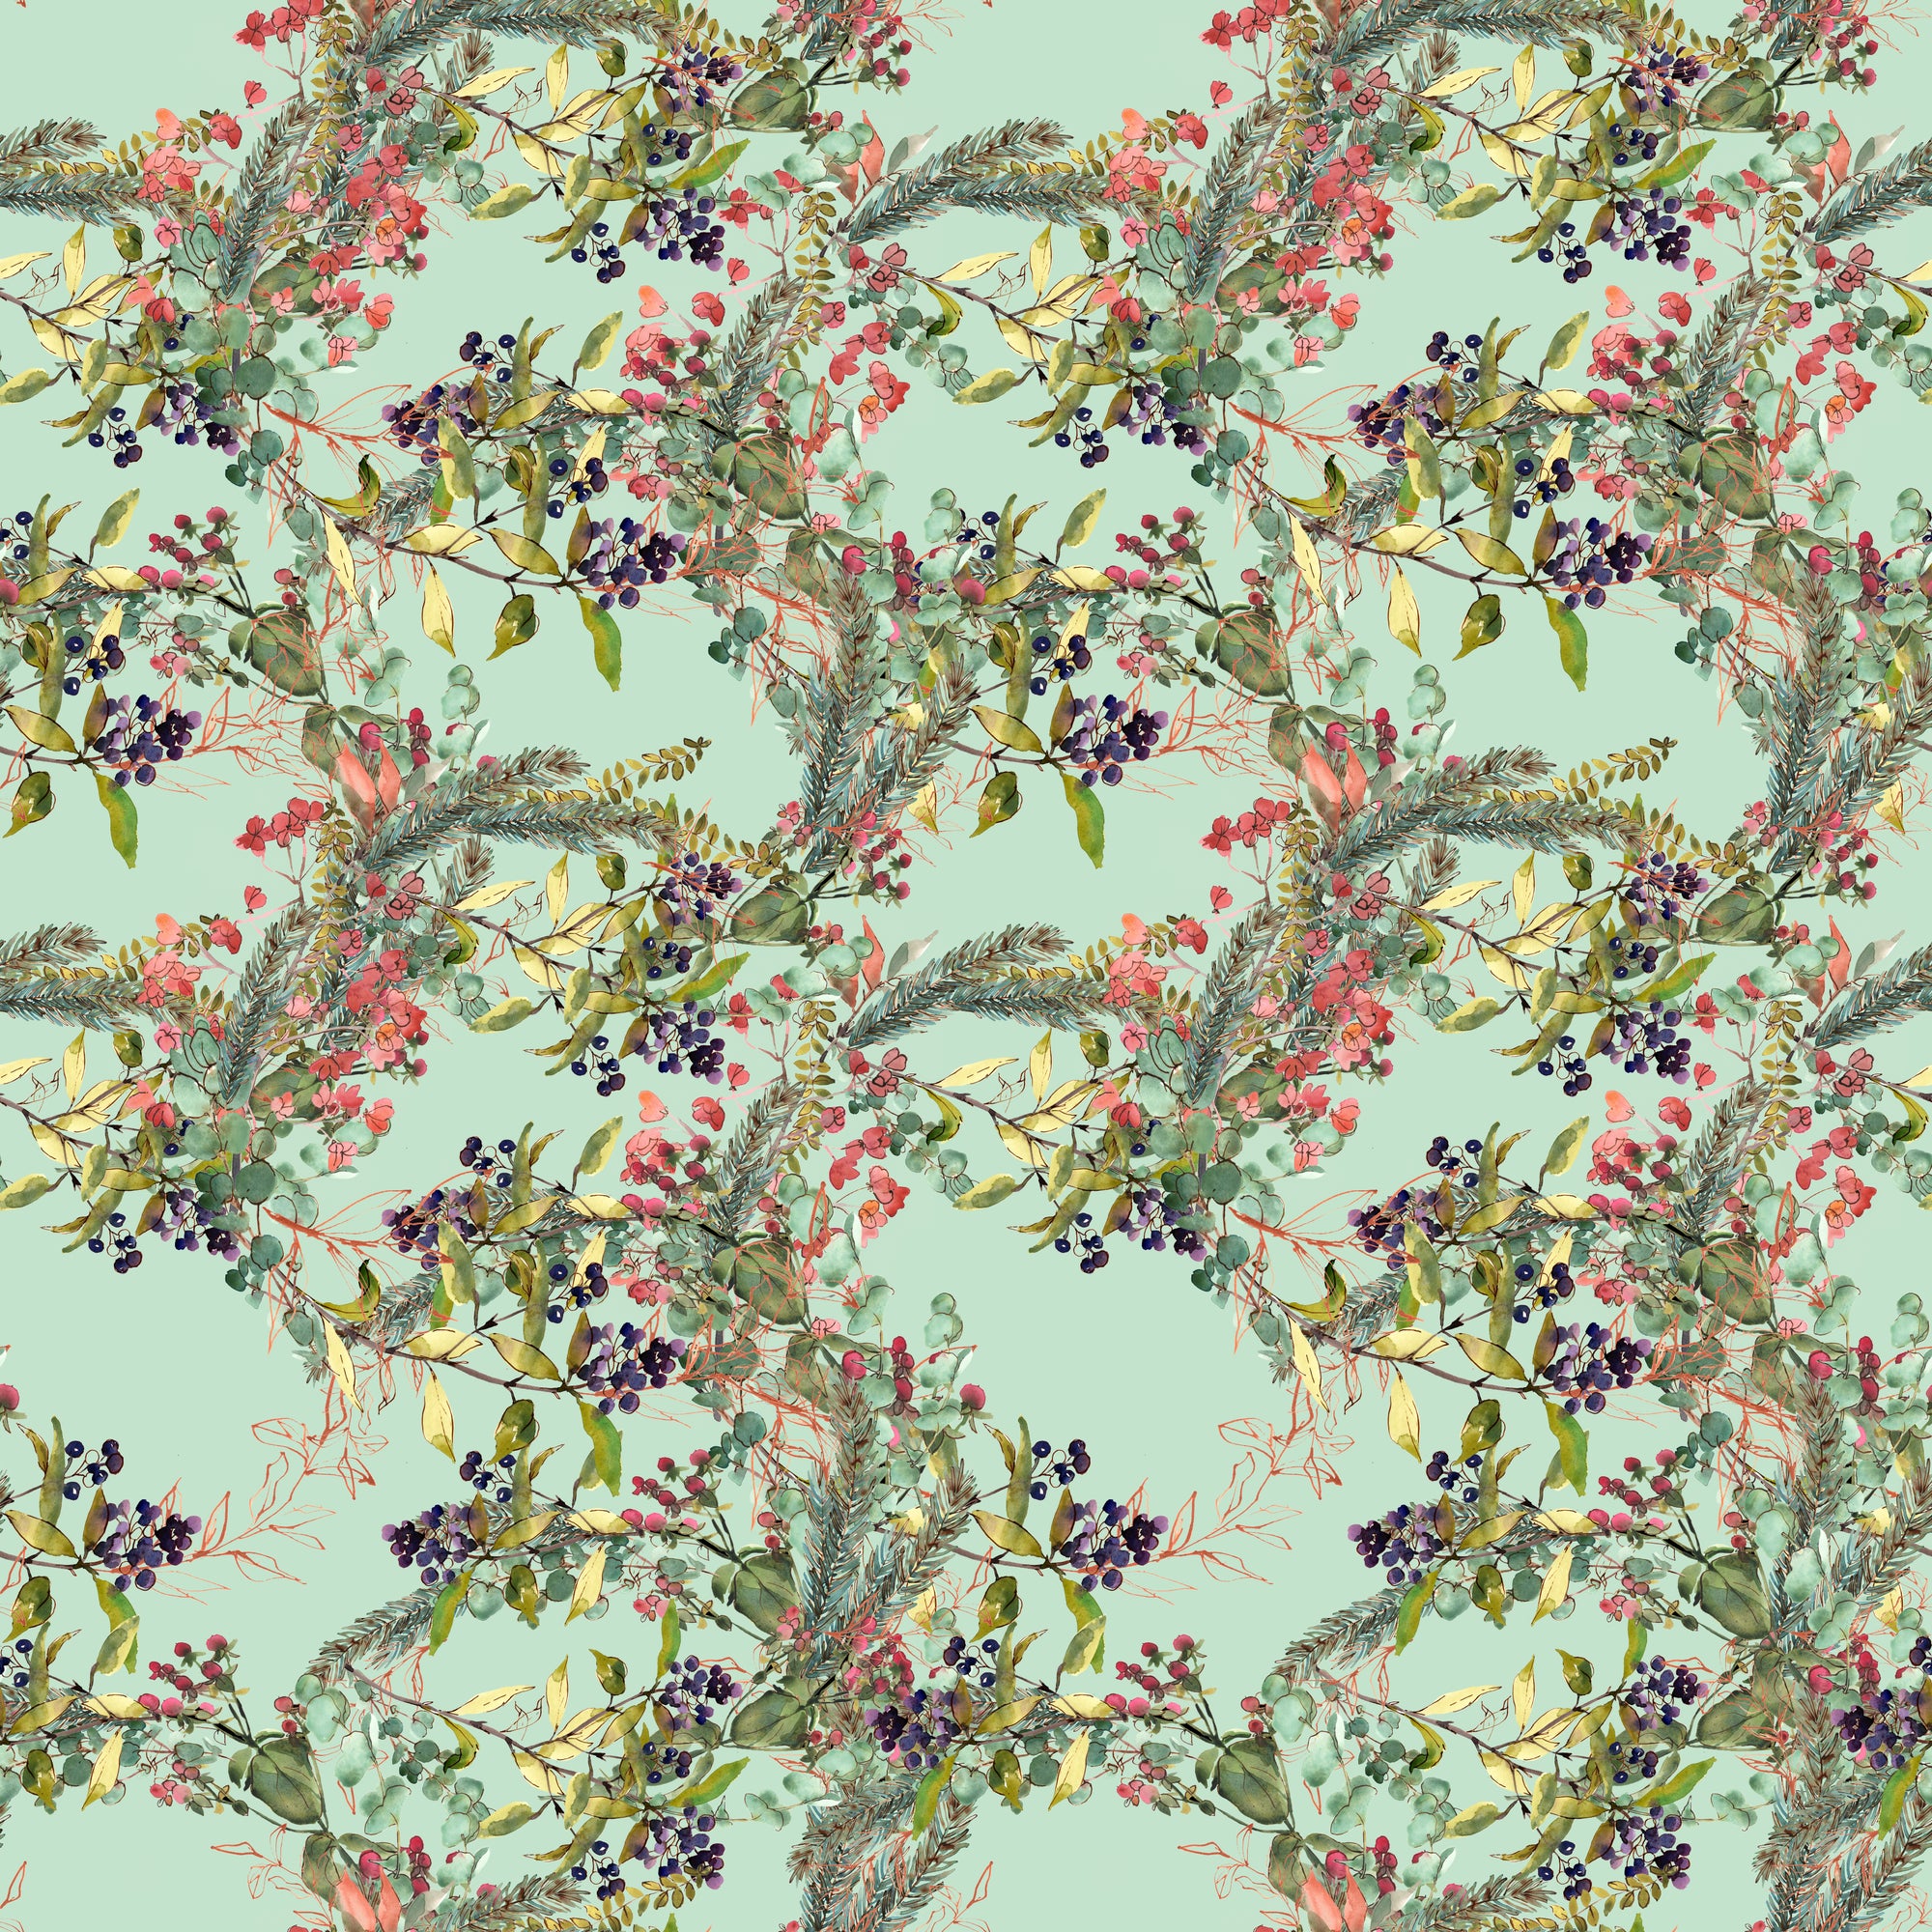 Wildberries Feathering Blossoms - Wrapping Paper